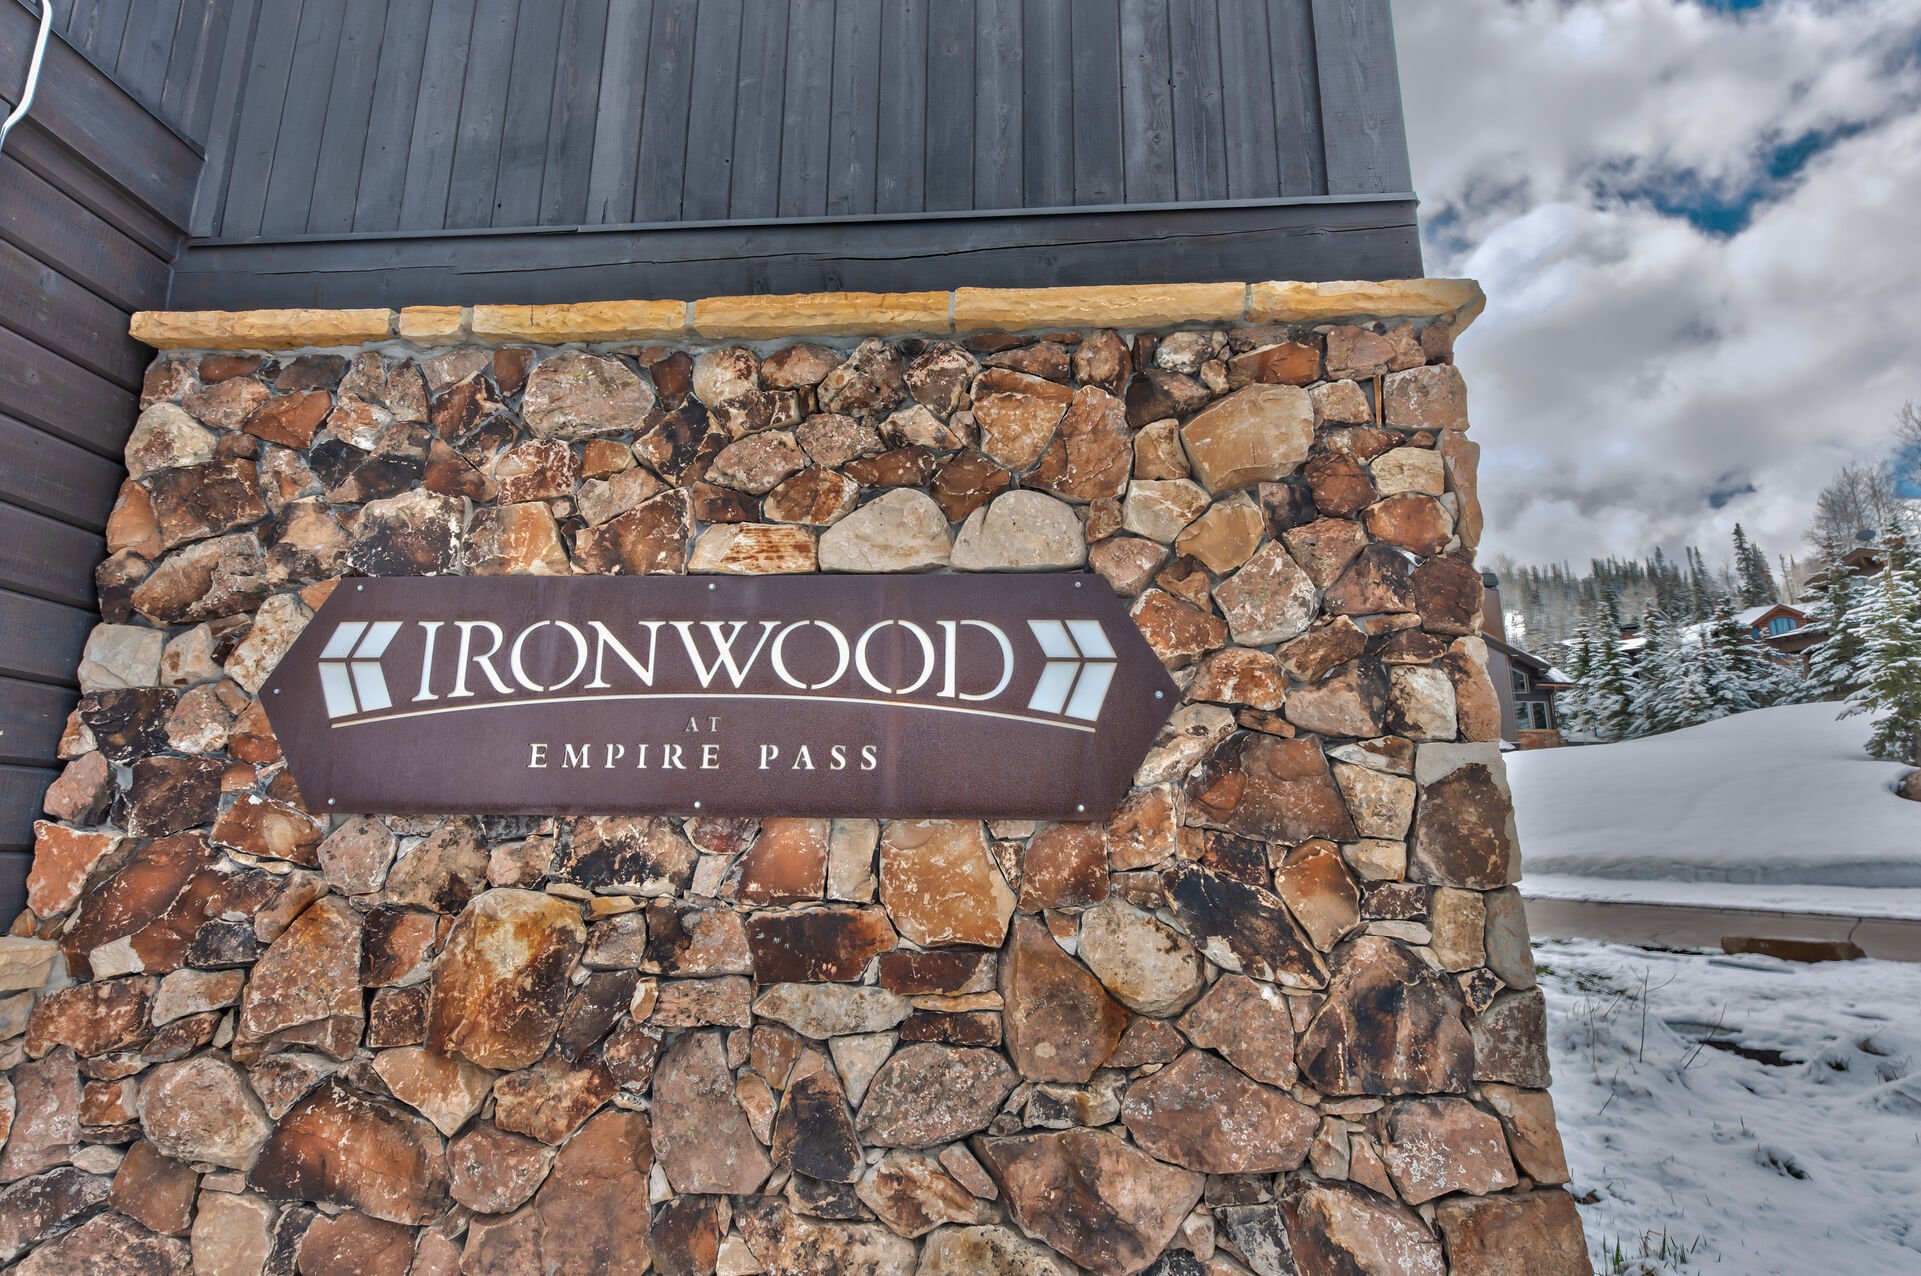 Ironwood at Empire Pass in Deer Valley.